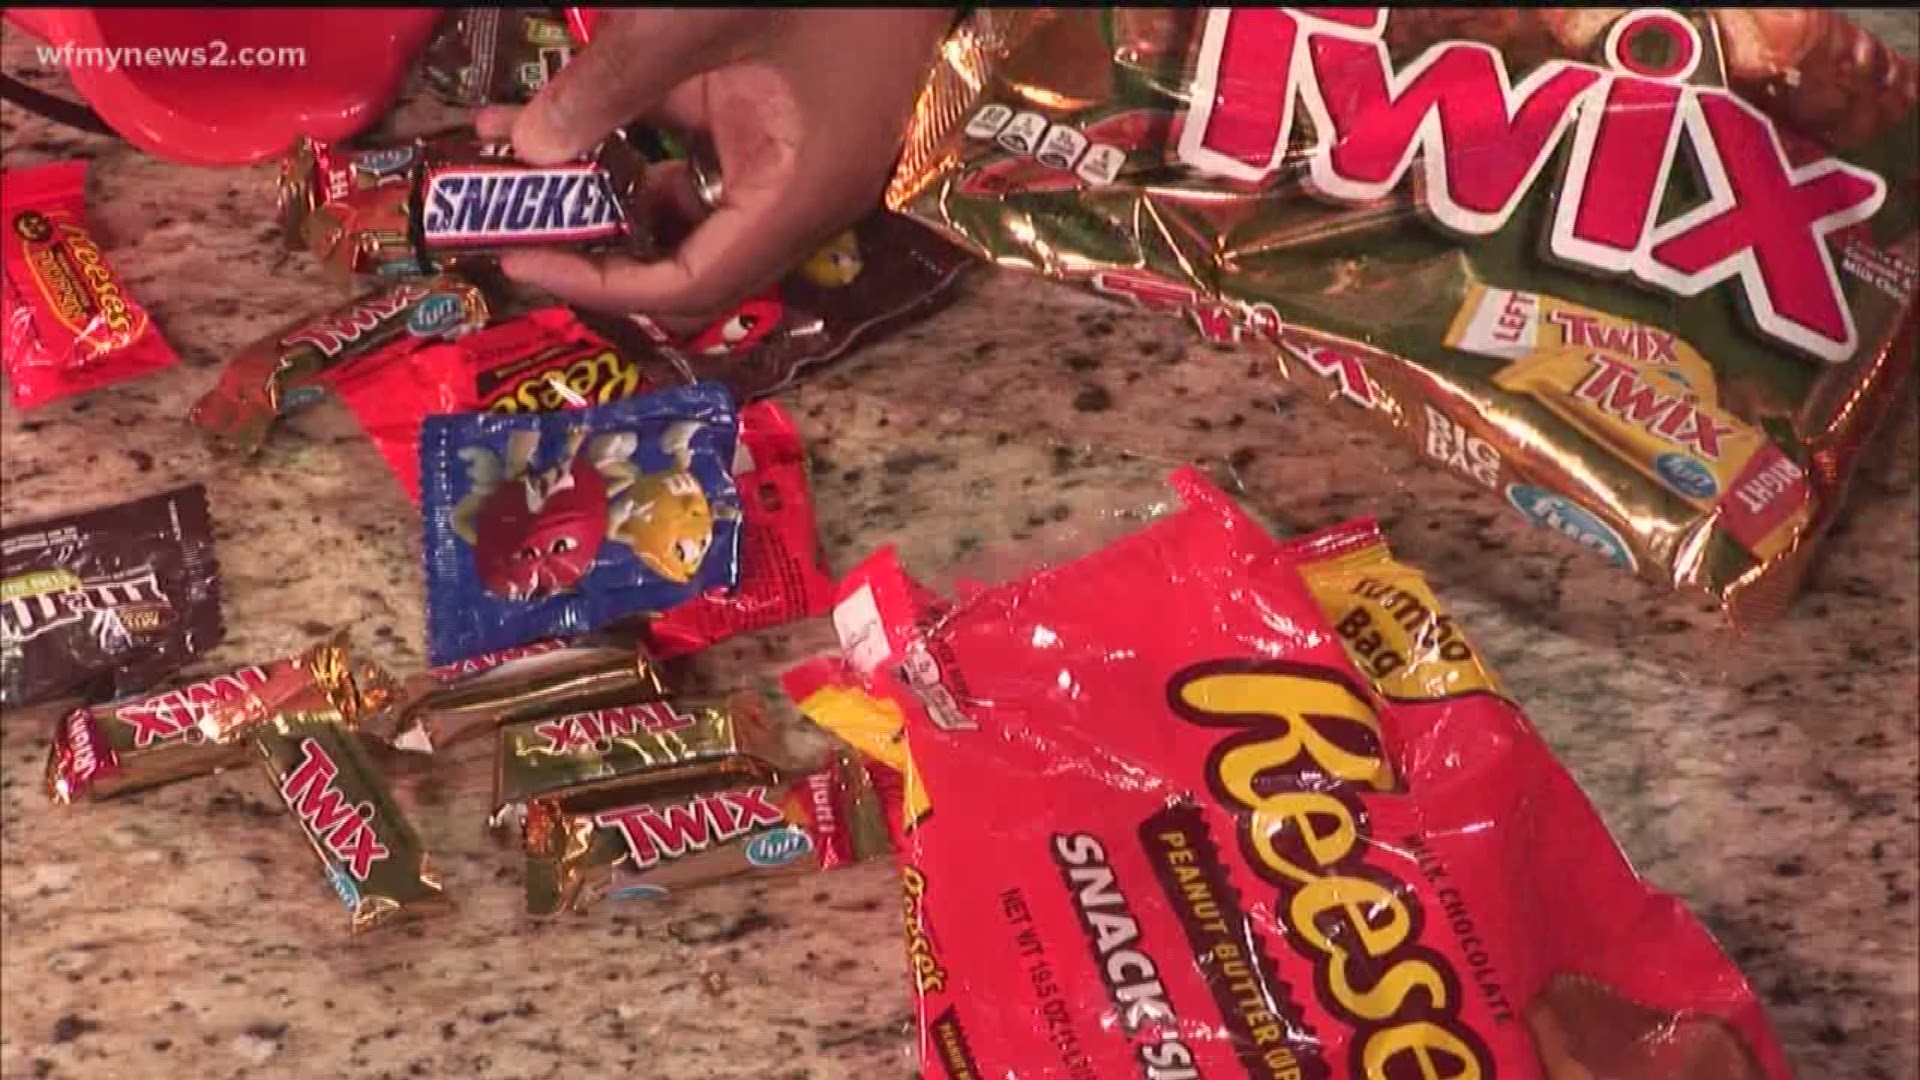 If you haven’t stocked up for Halloween yet, 2 wants to Know found some cheap prices for name brand candy.